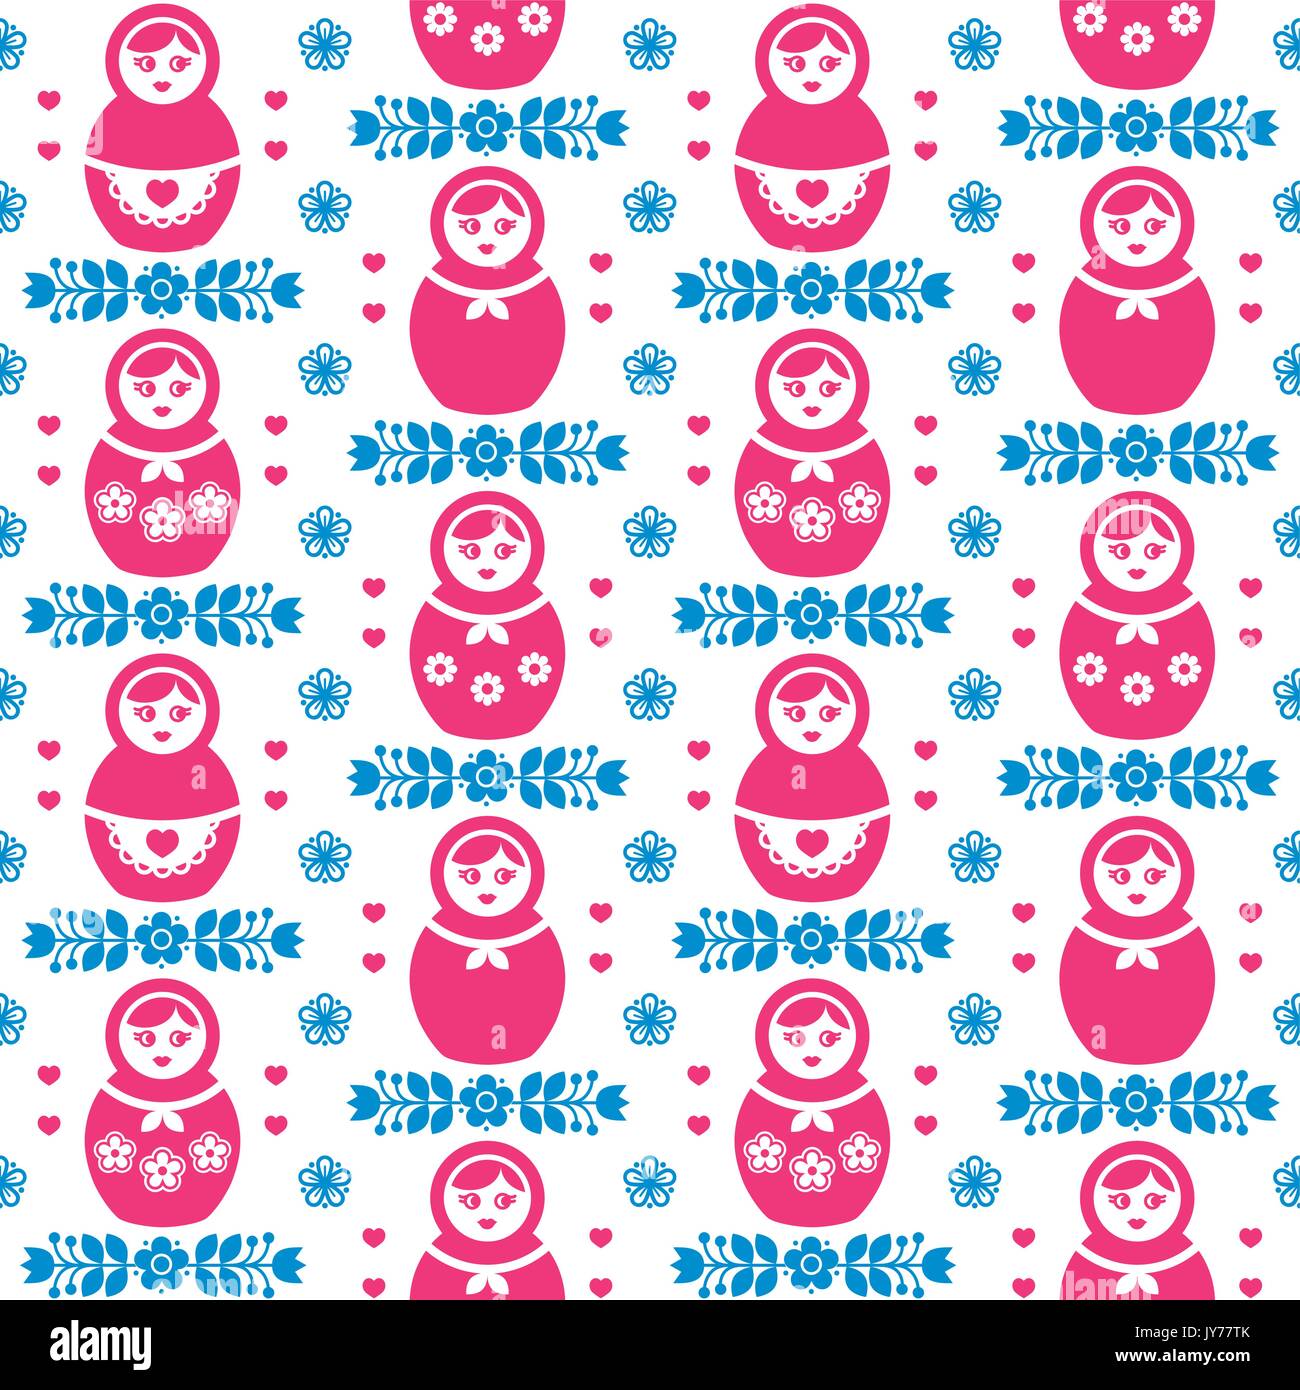 Russian doll Matryoshka folk art floral seamless pattern  Russian dolls retro repetitive pink and blue background with flowers Stock Vector